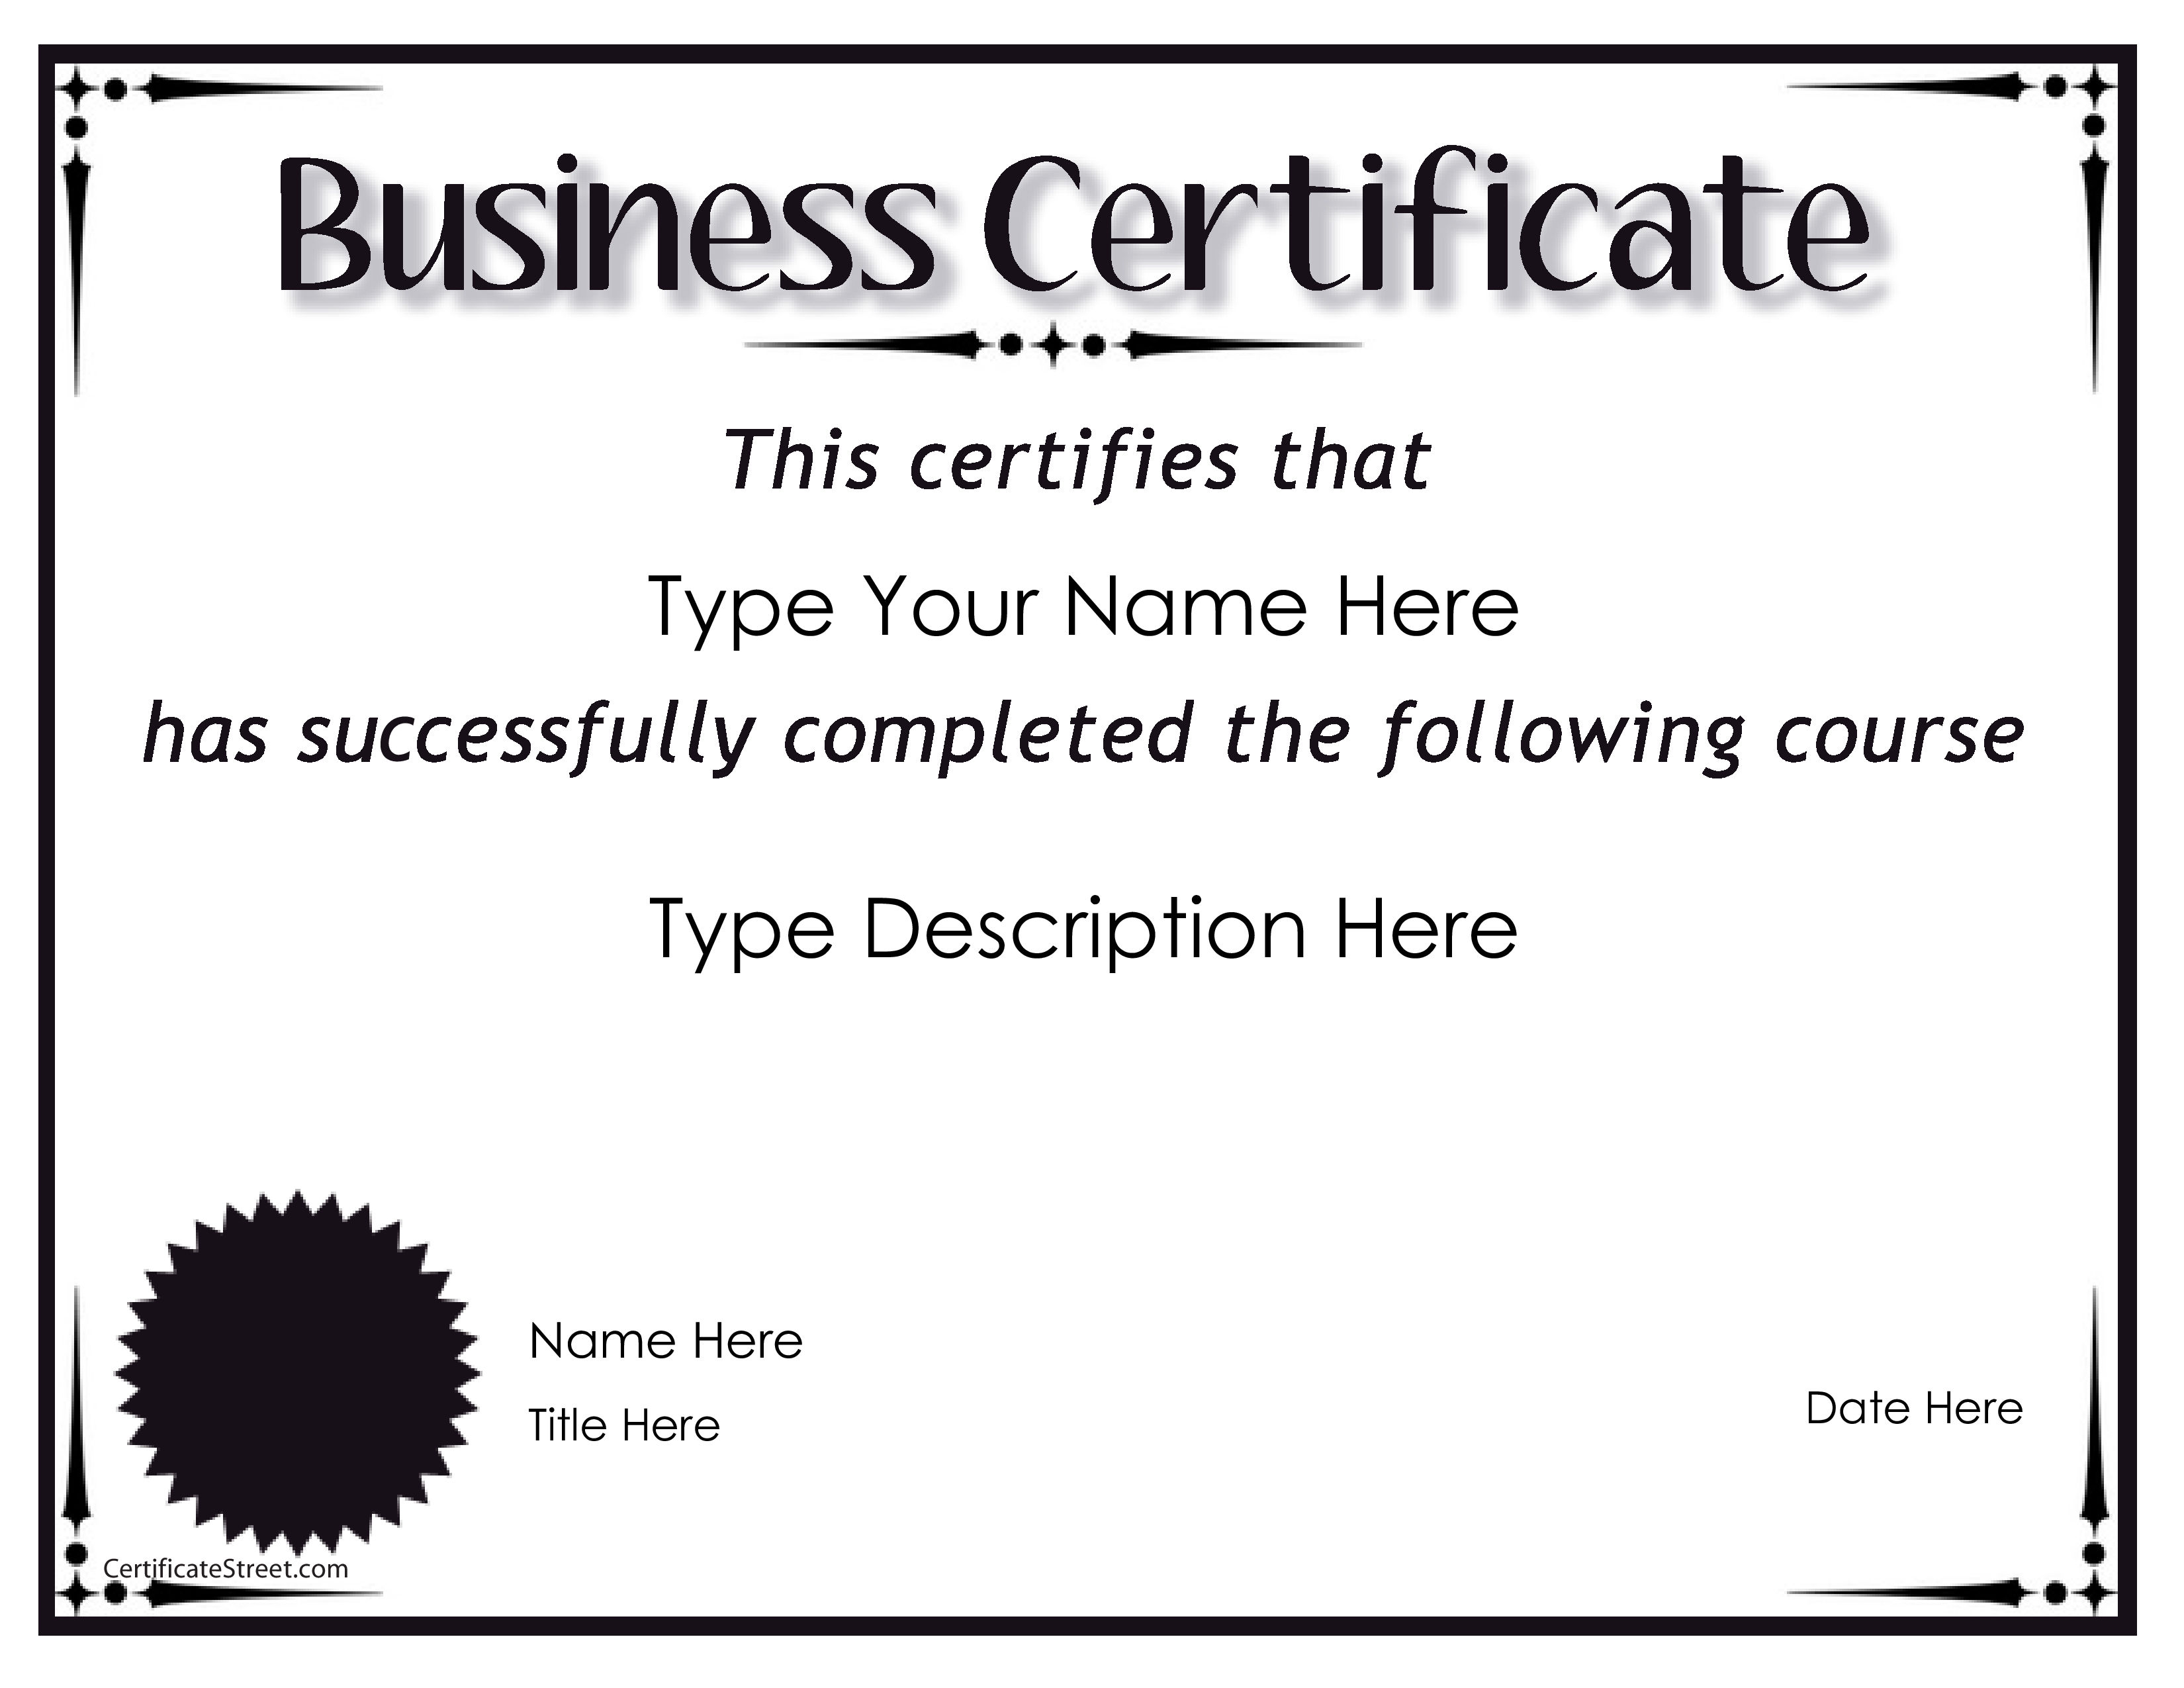 Business Certificate main image